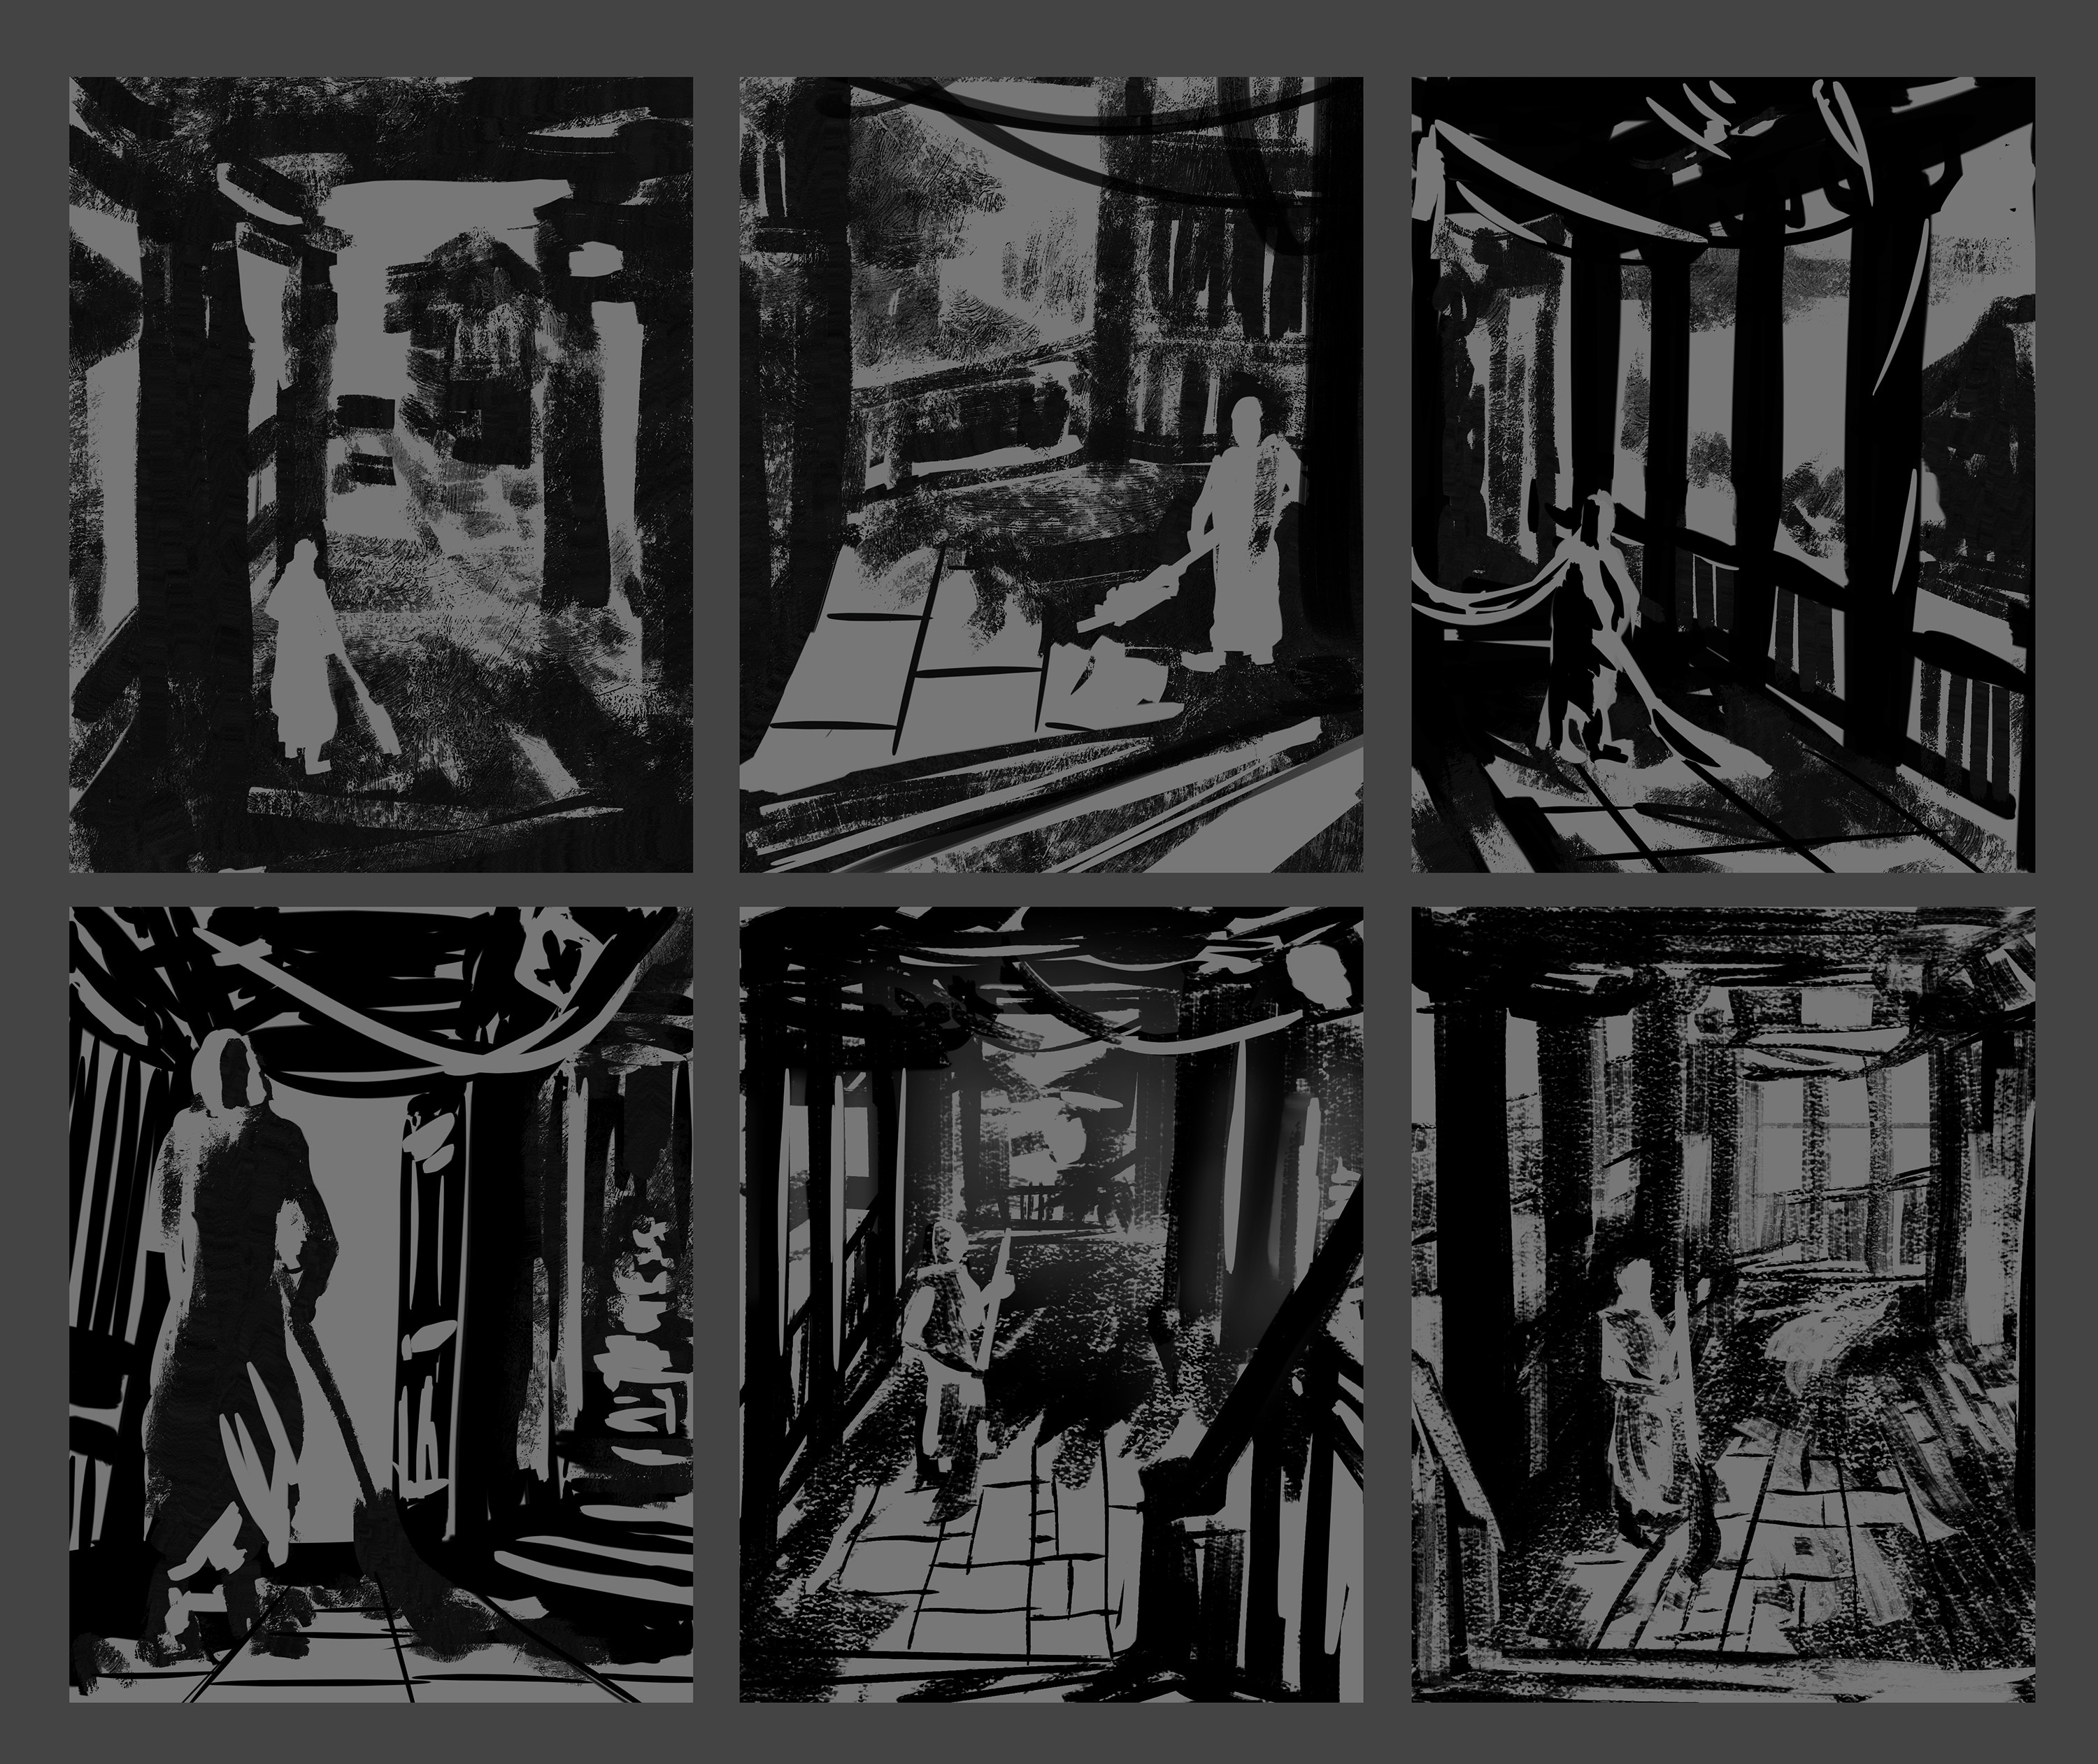 Initial quick composition sketches